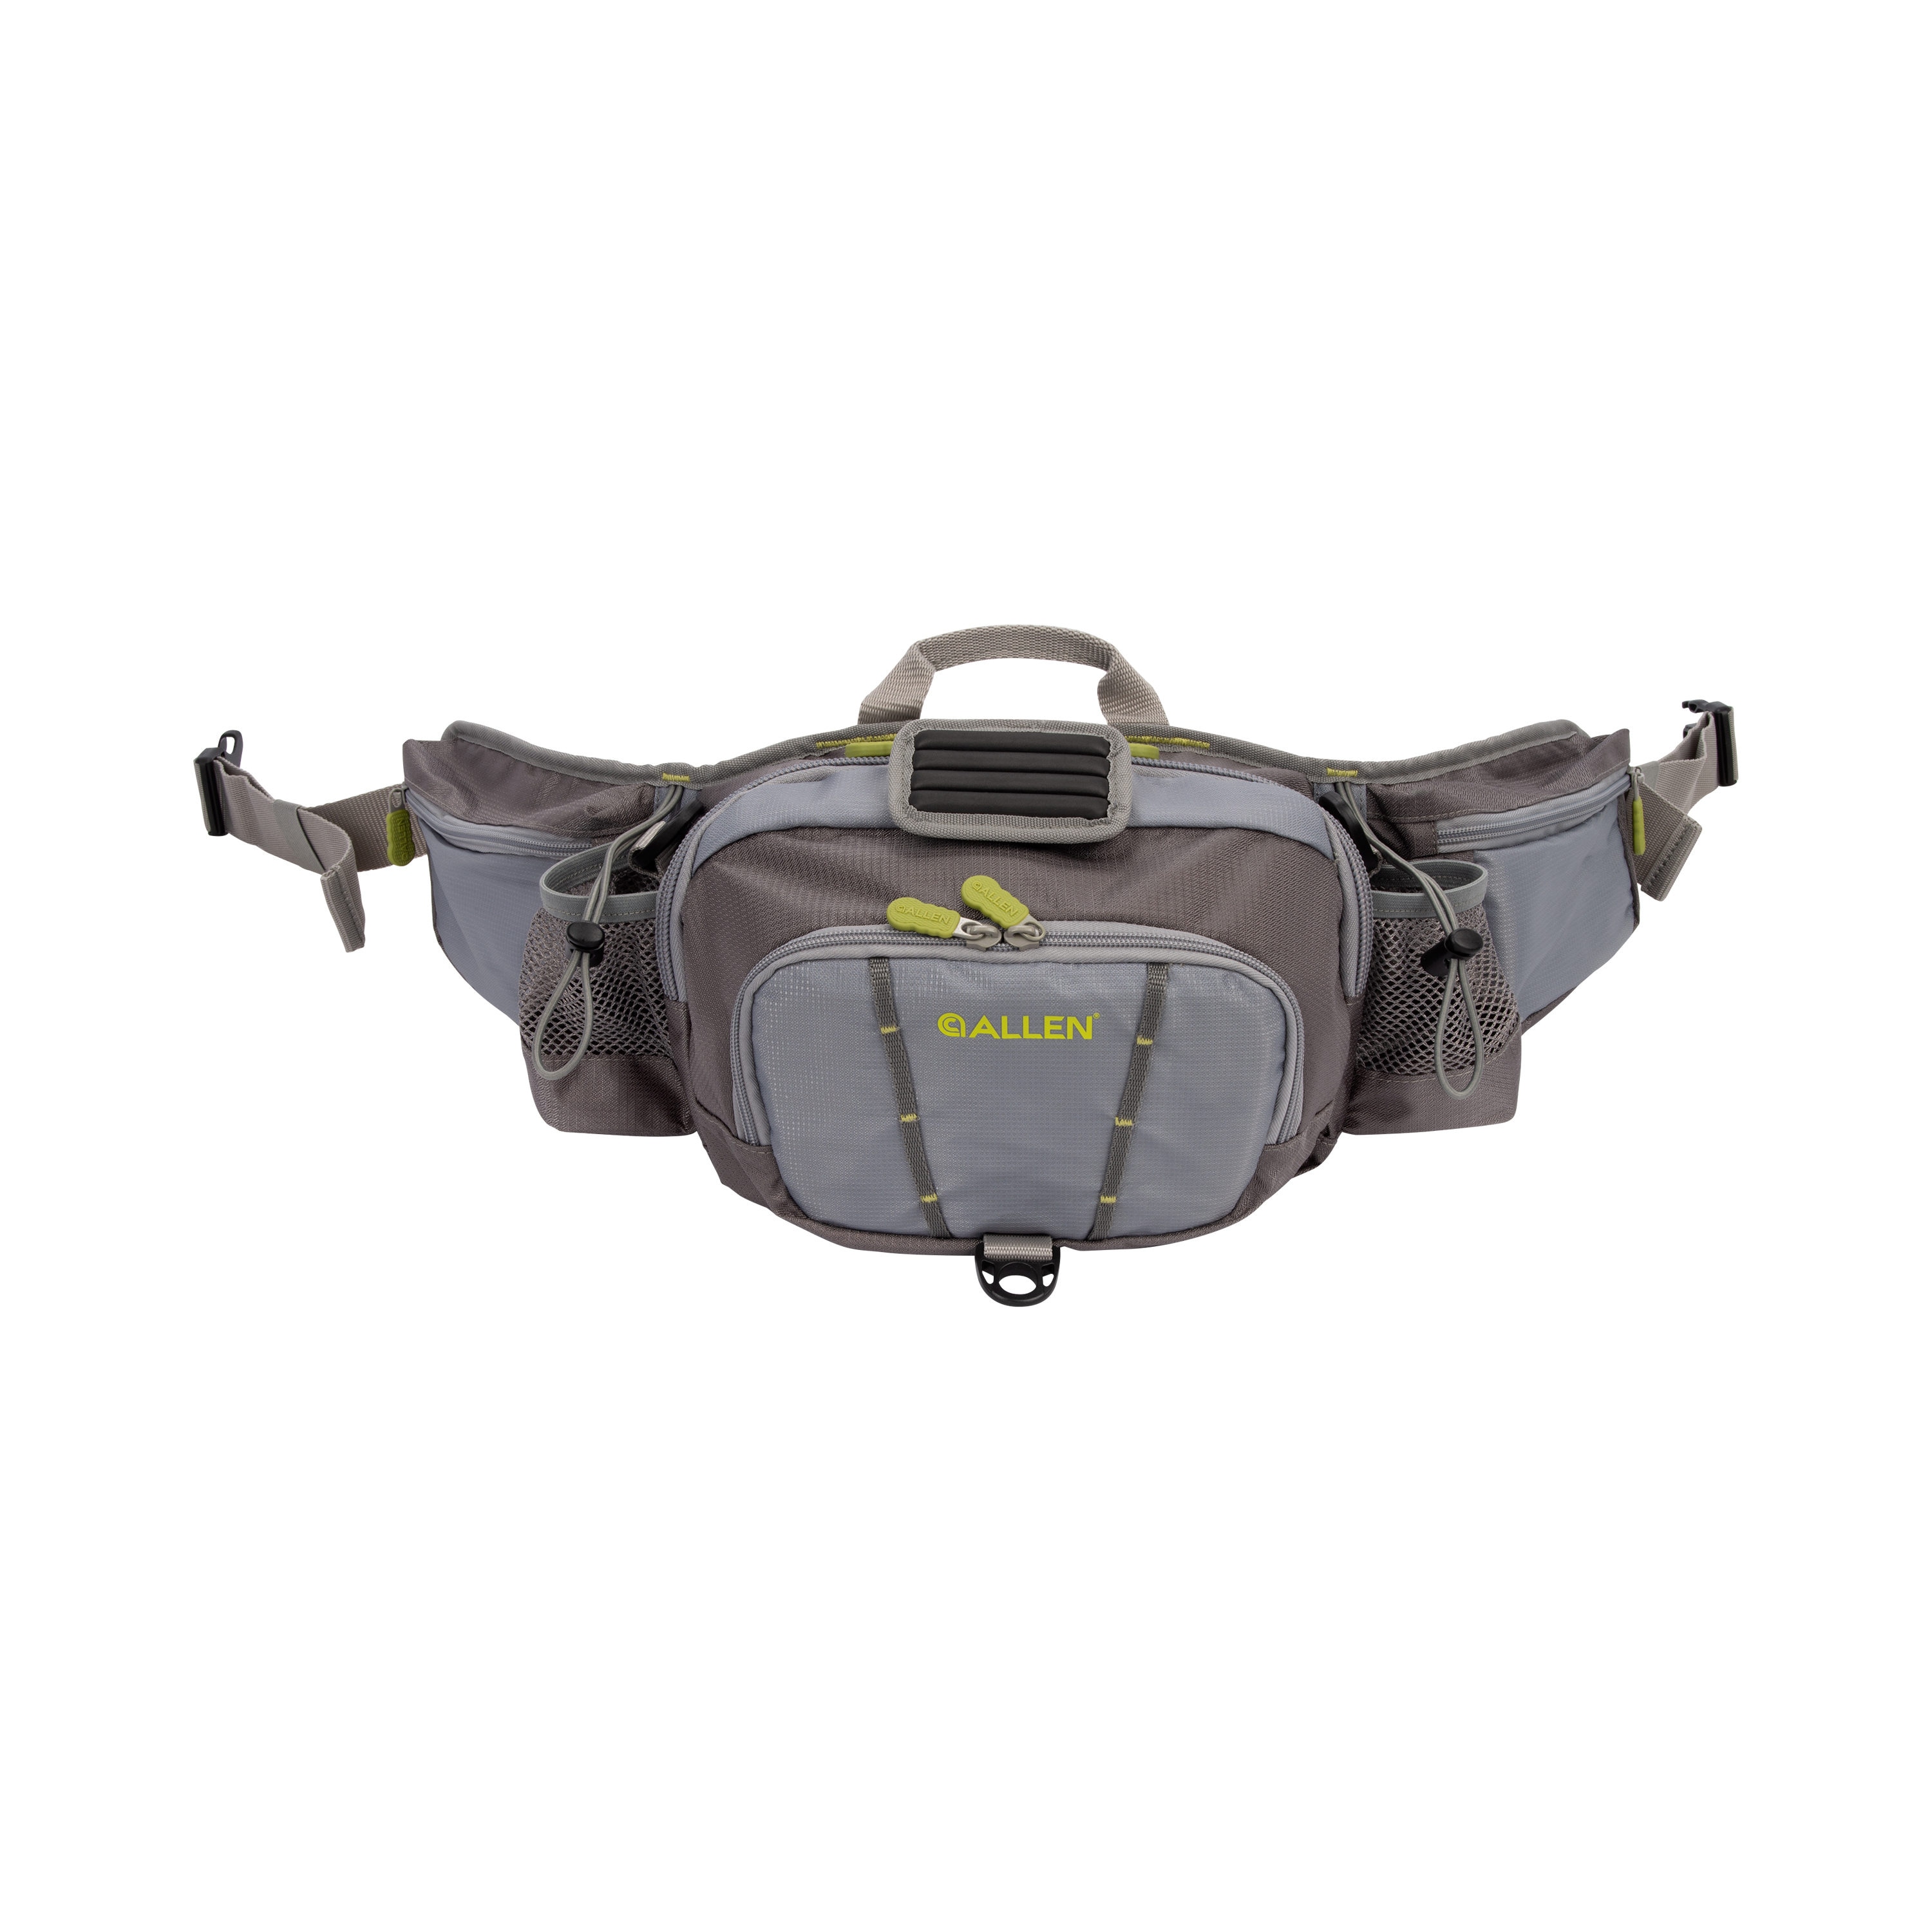 fishing sling pack, fishing sling pack Suppliers and Manufacturers